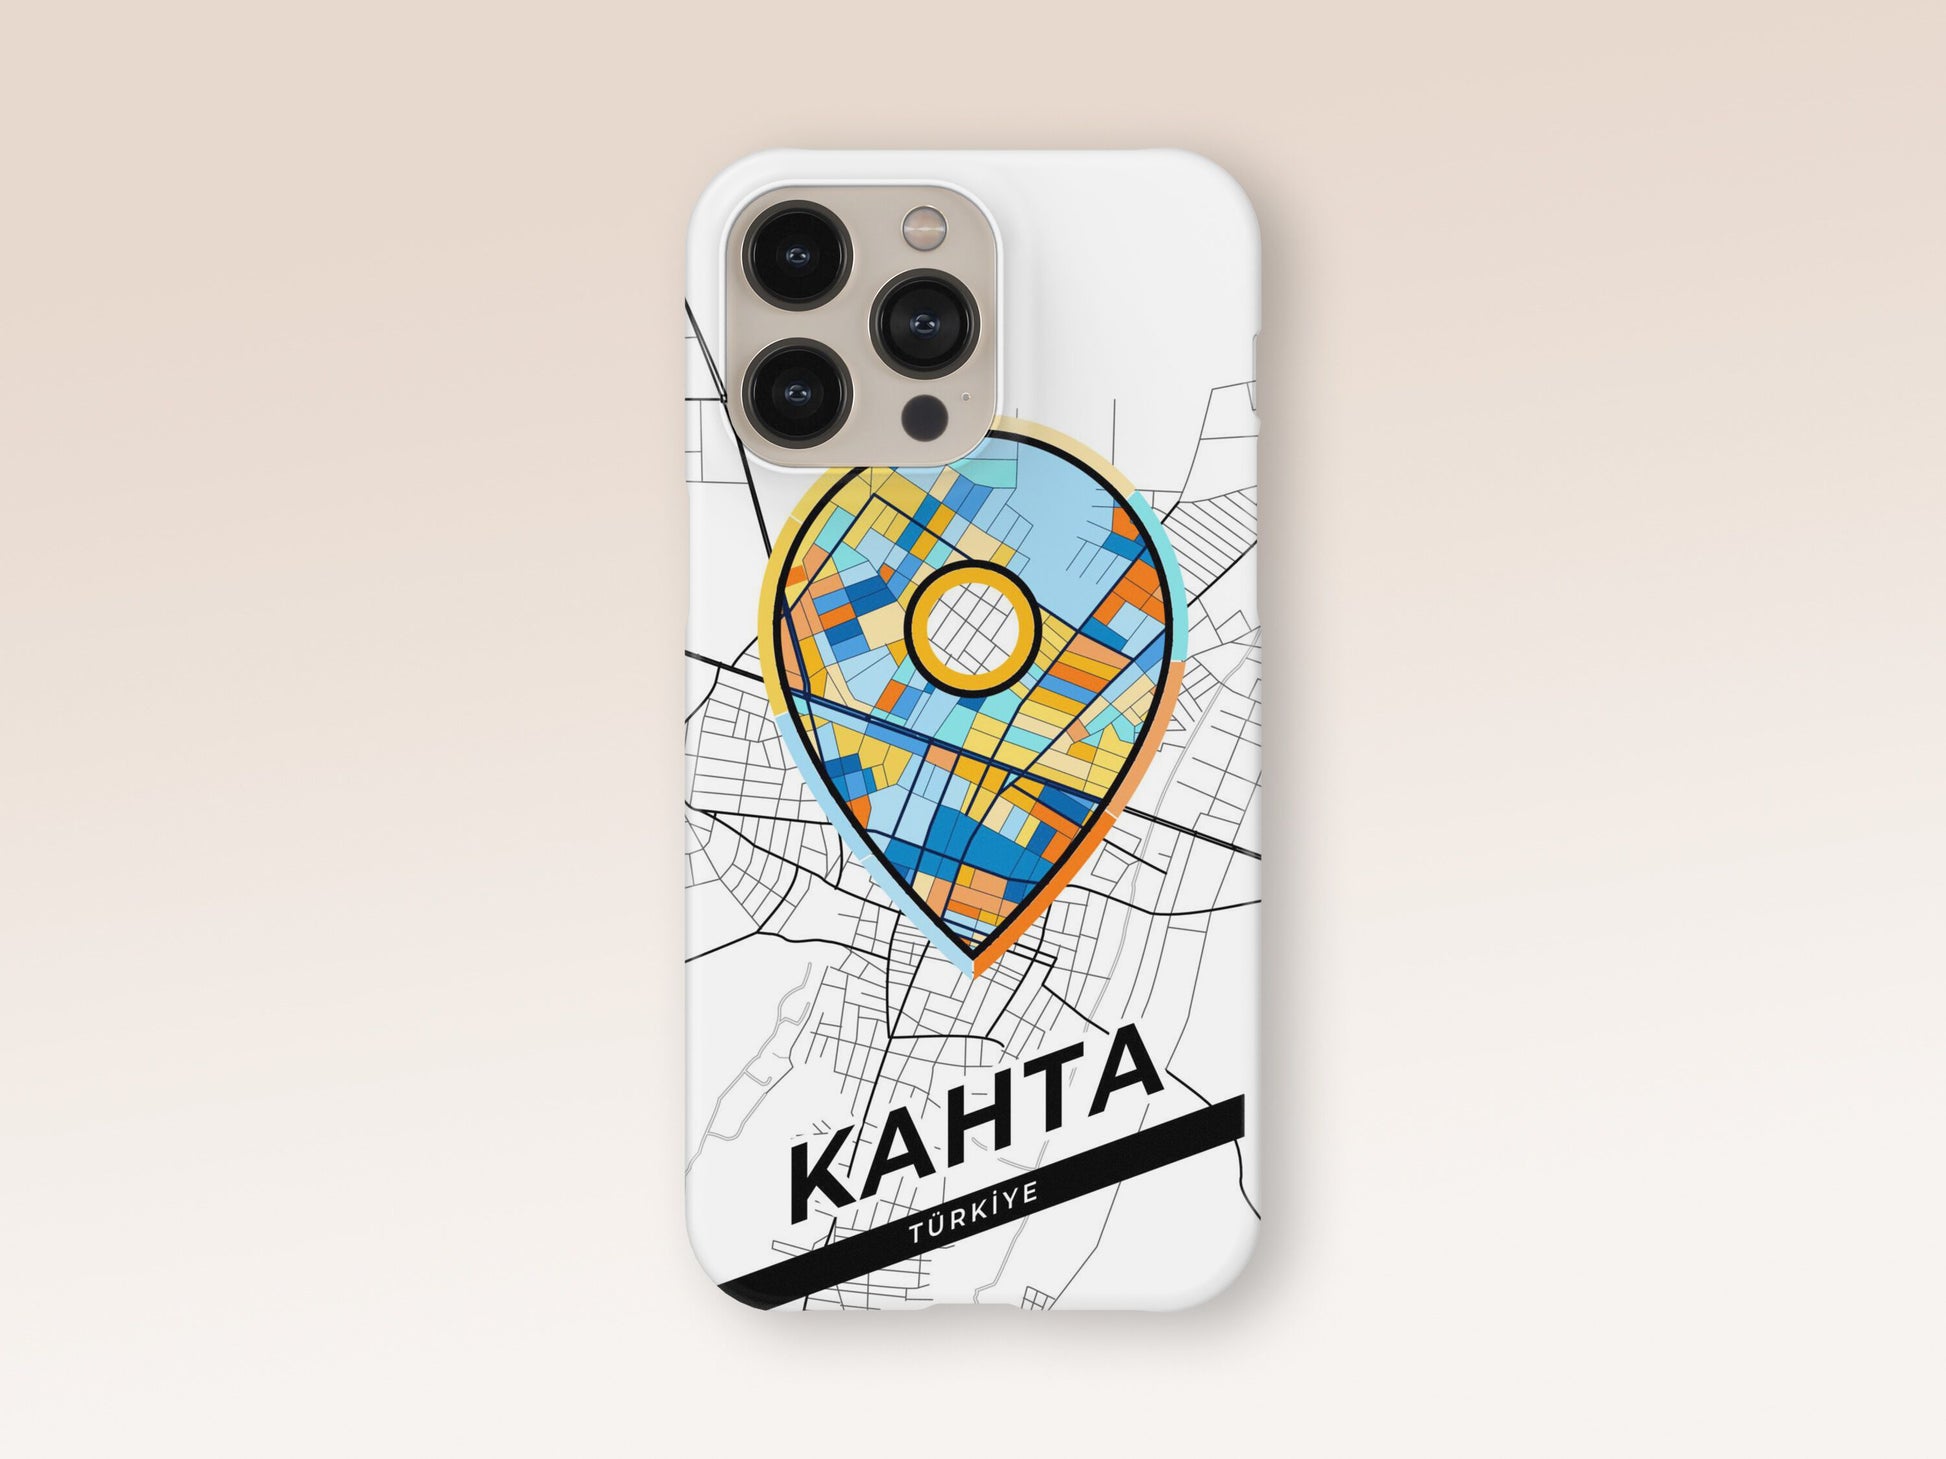 Kahta Turkey slim phone case with colorful icon. Birthday, wedding or housewarming gift. Couple match cases. 1